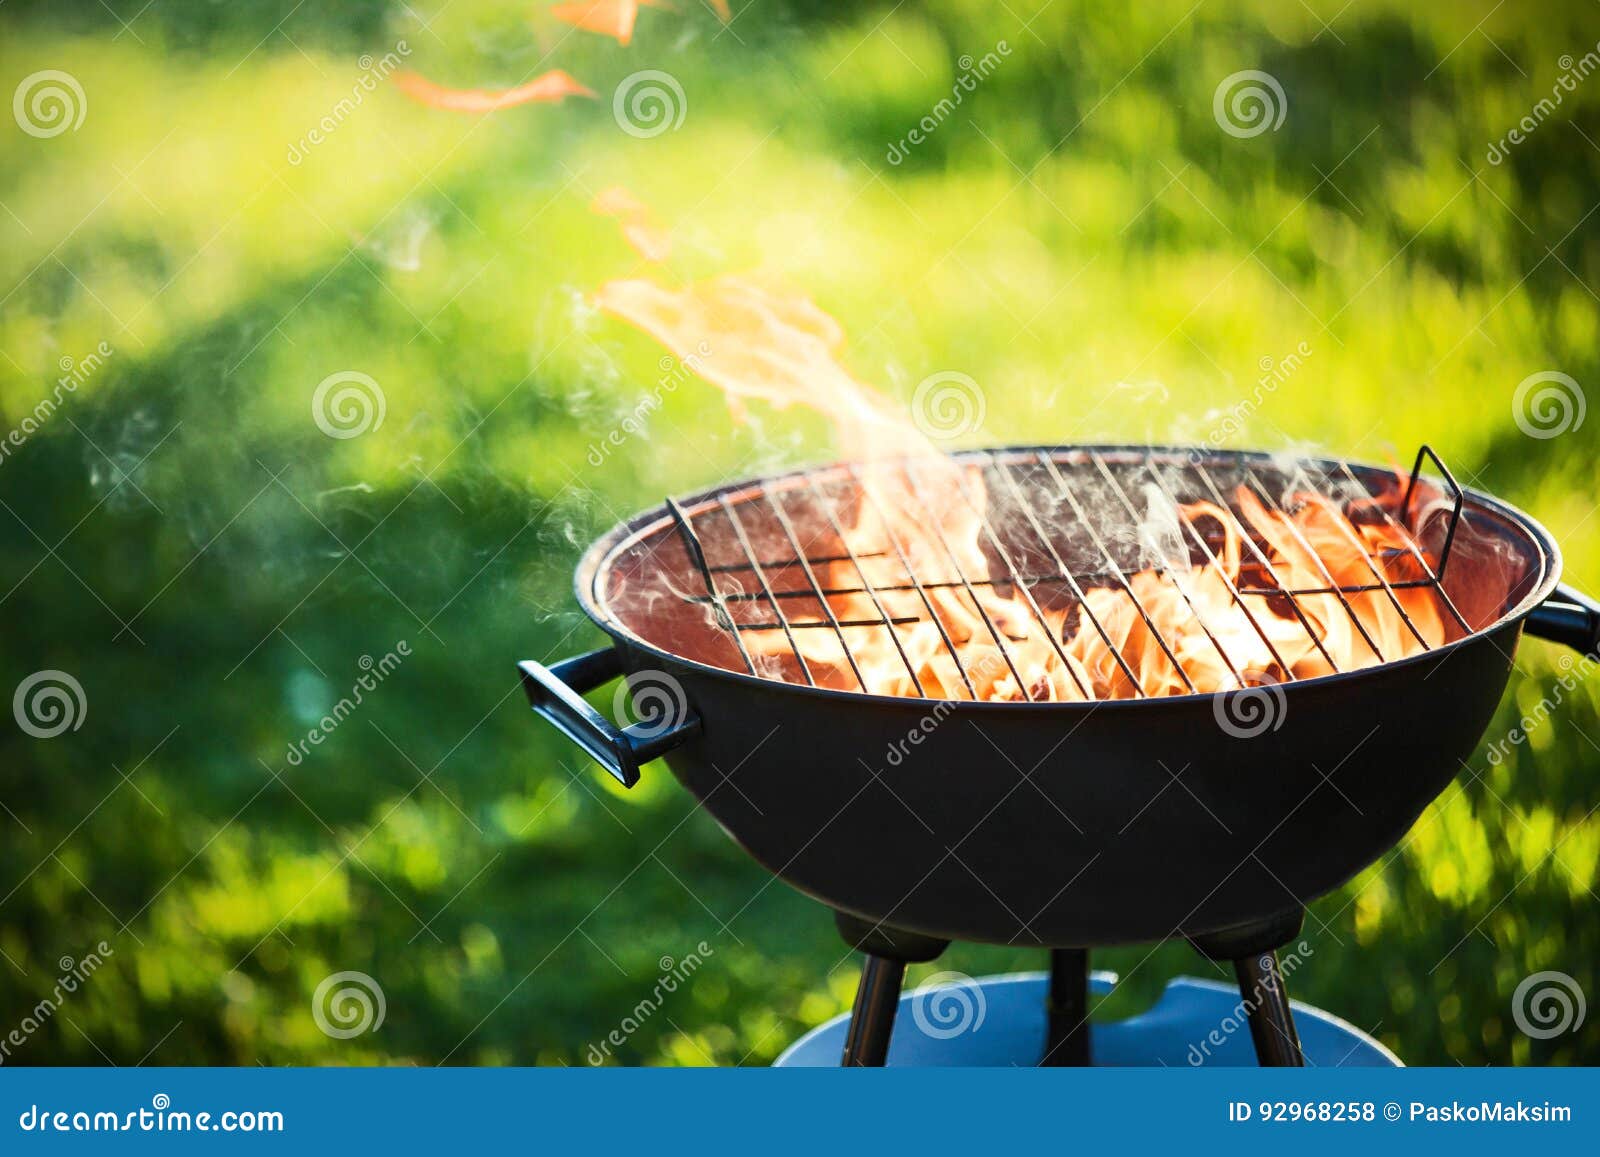 barbecue grill with fire